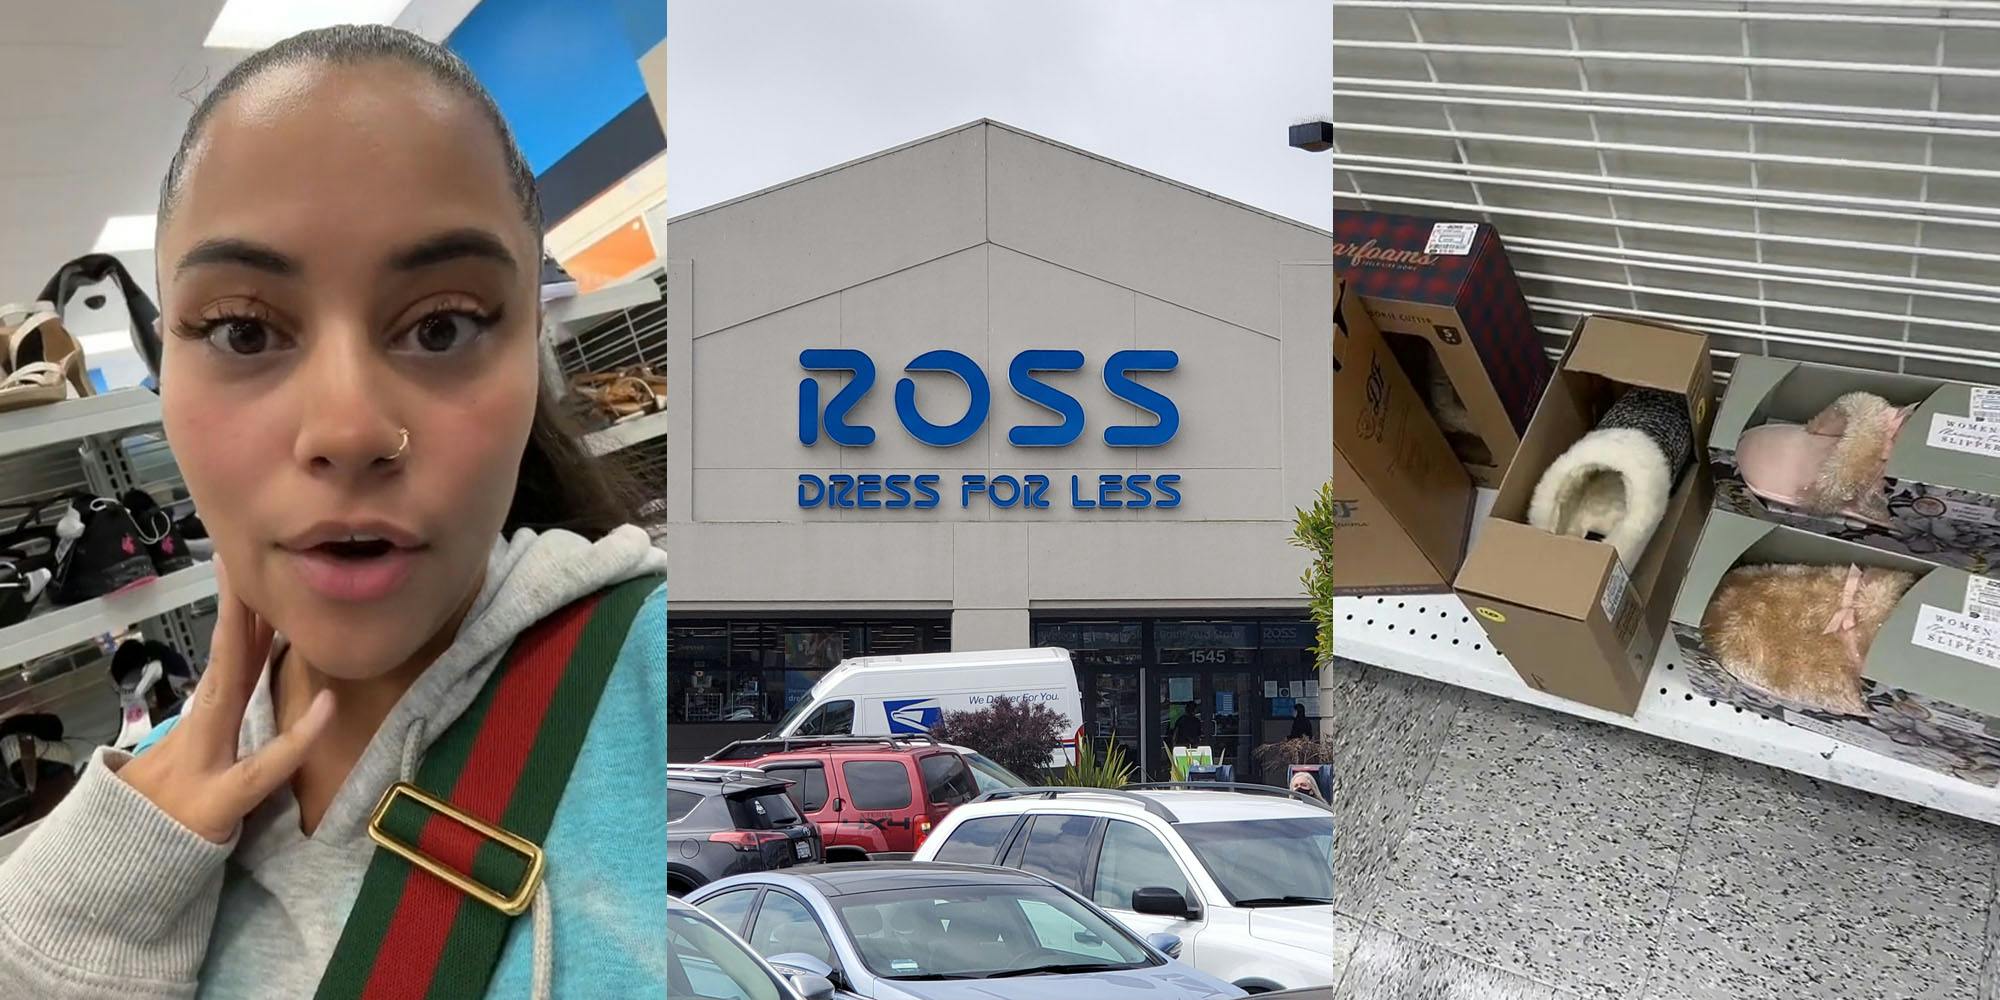 5 Warnings to Shoppers From Ex-Ross Employees